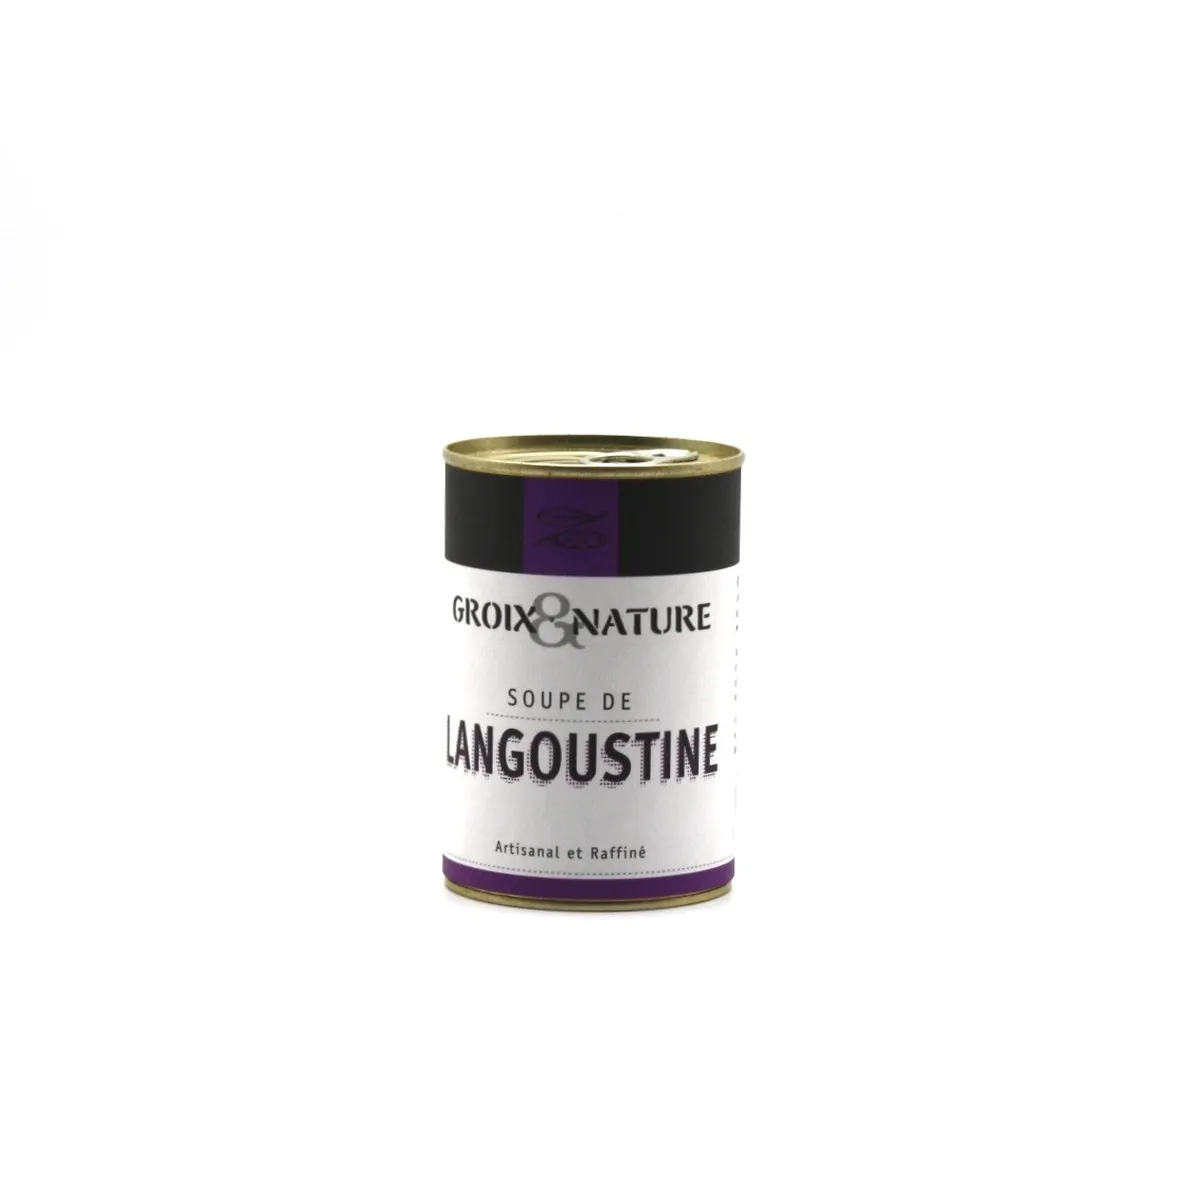 GROIX AND NATURE LANGOUSTINE SOUP 400 G